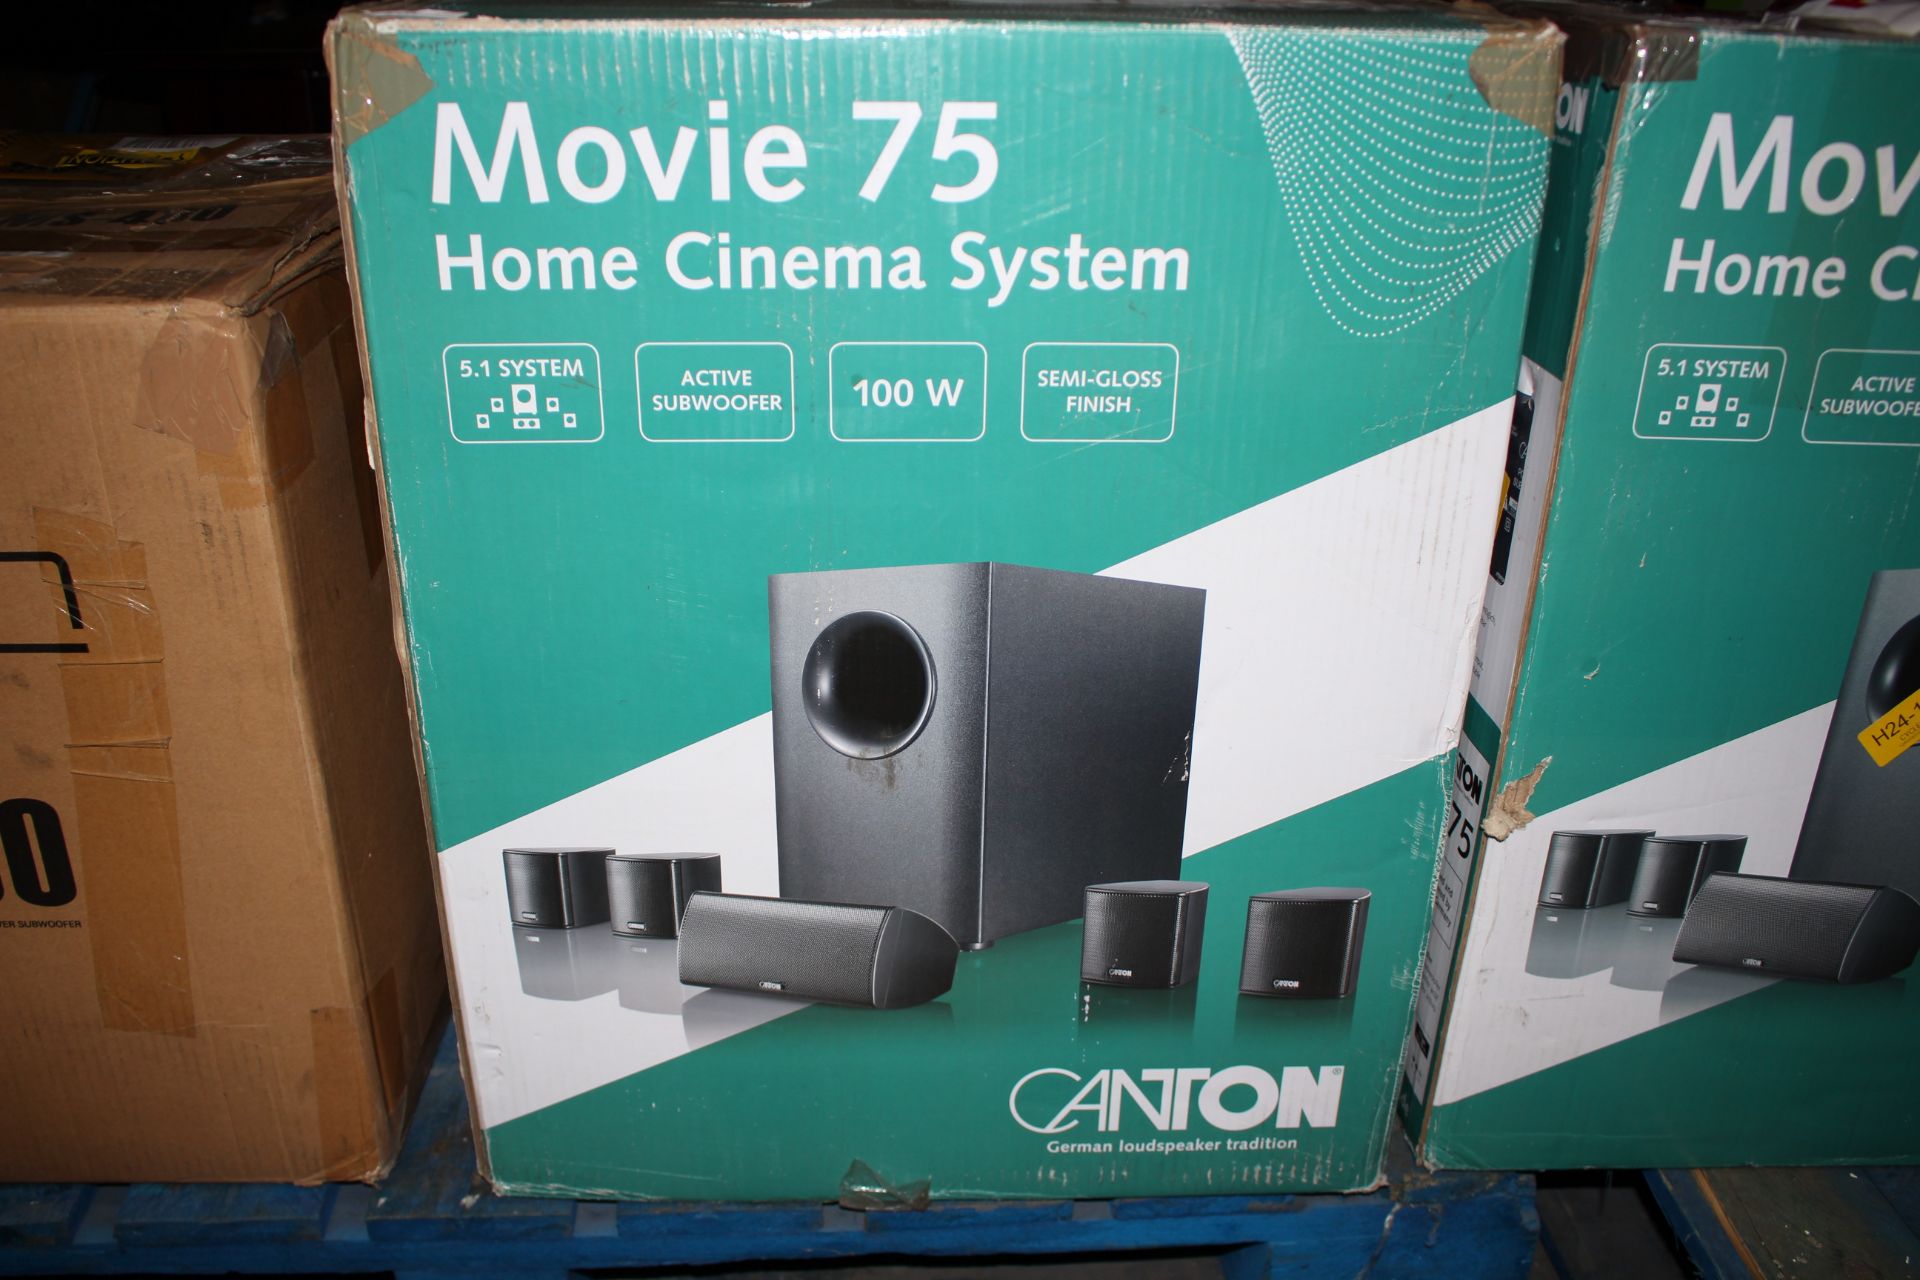 BOXED CANTON MOVIE 75 HOME CINEMA SYSTEM RRP £316.51 - Image 3 of 3